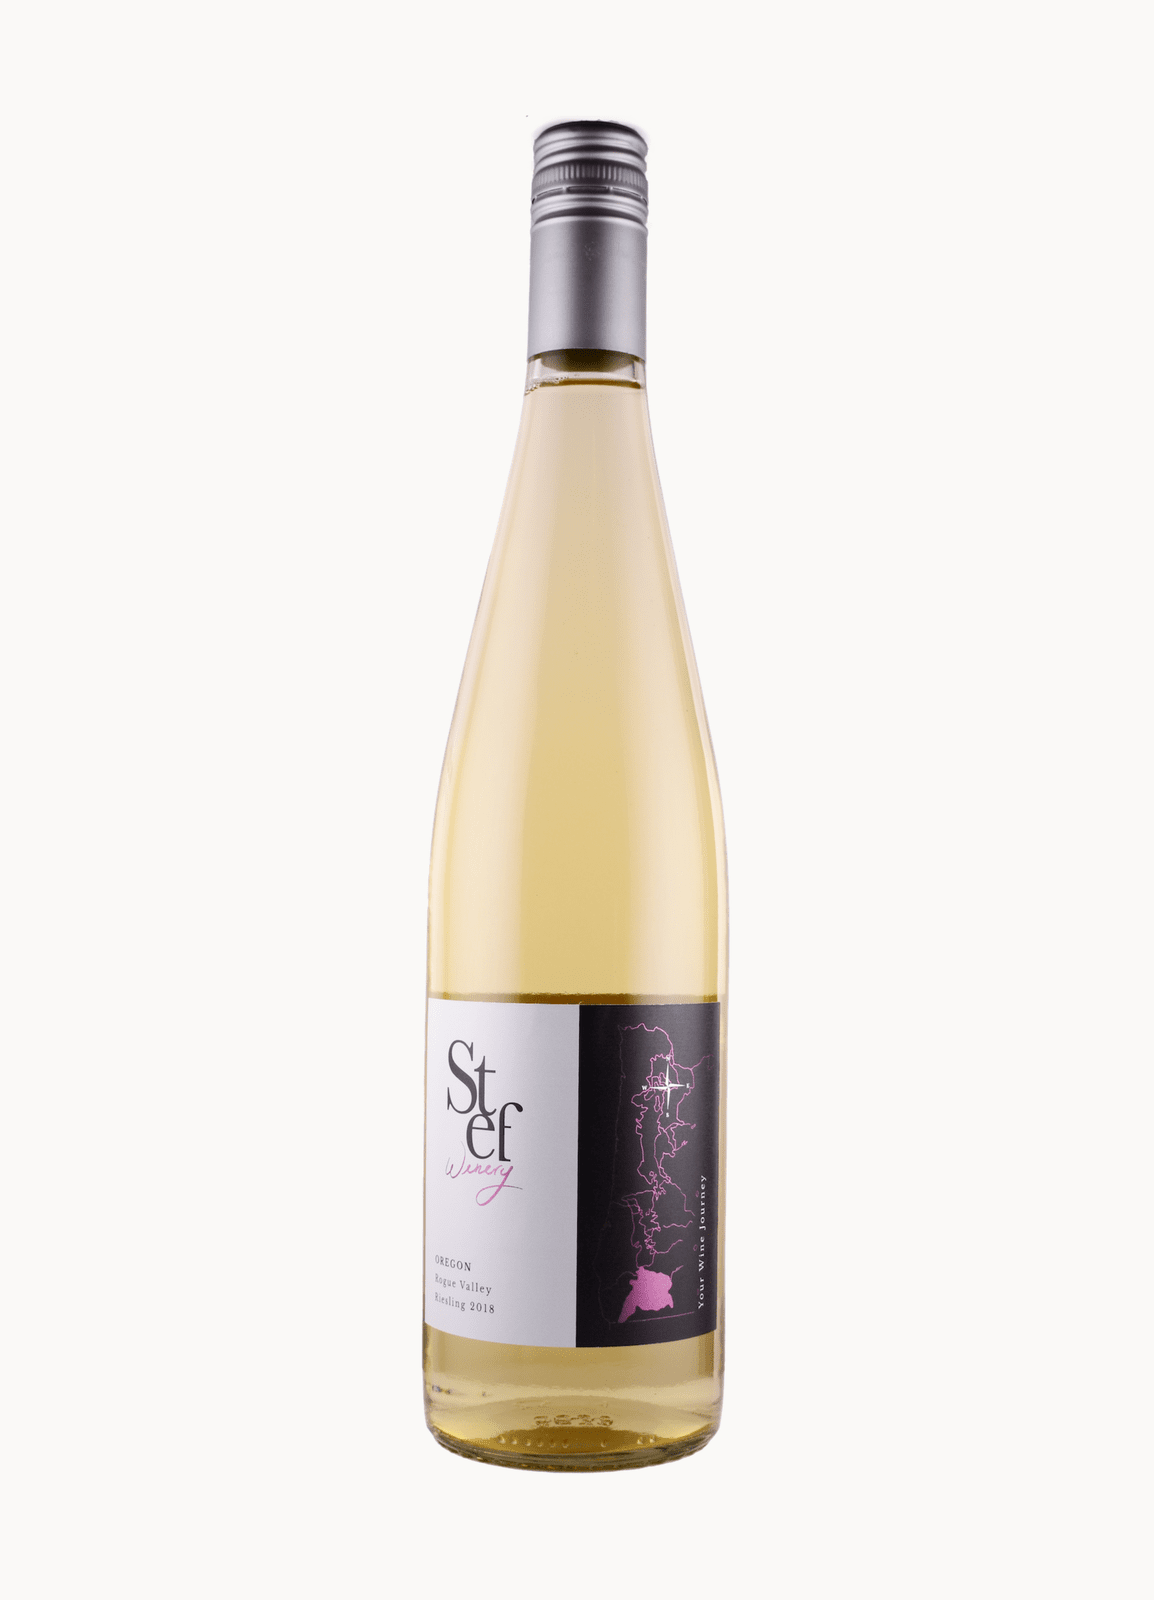 Oregon - Rogue Valley - Riesling 2018